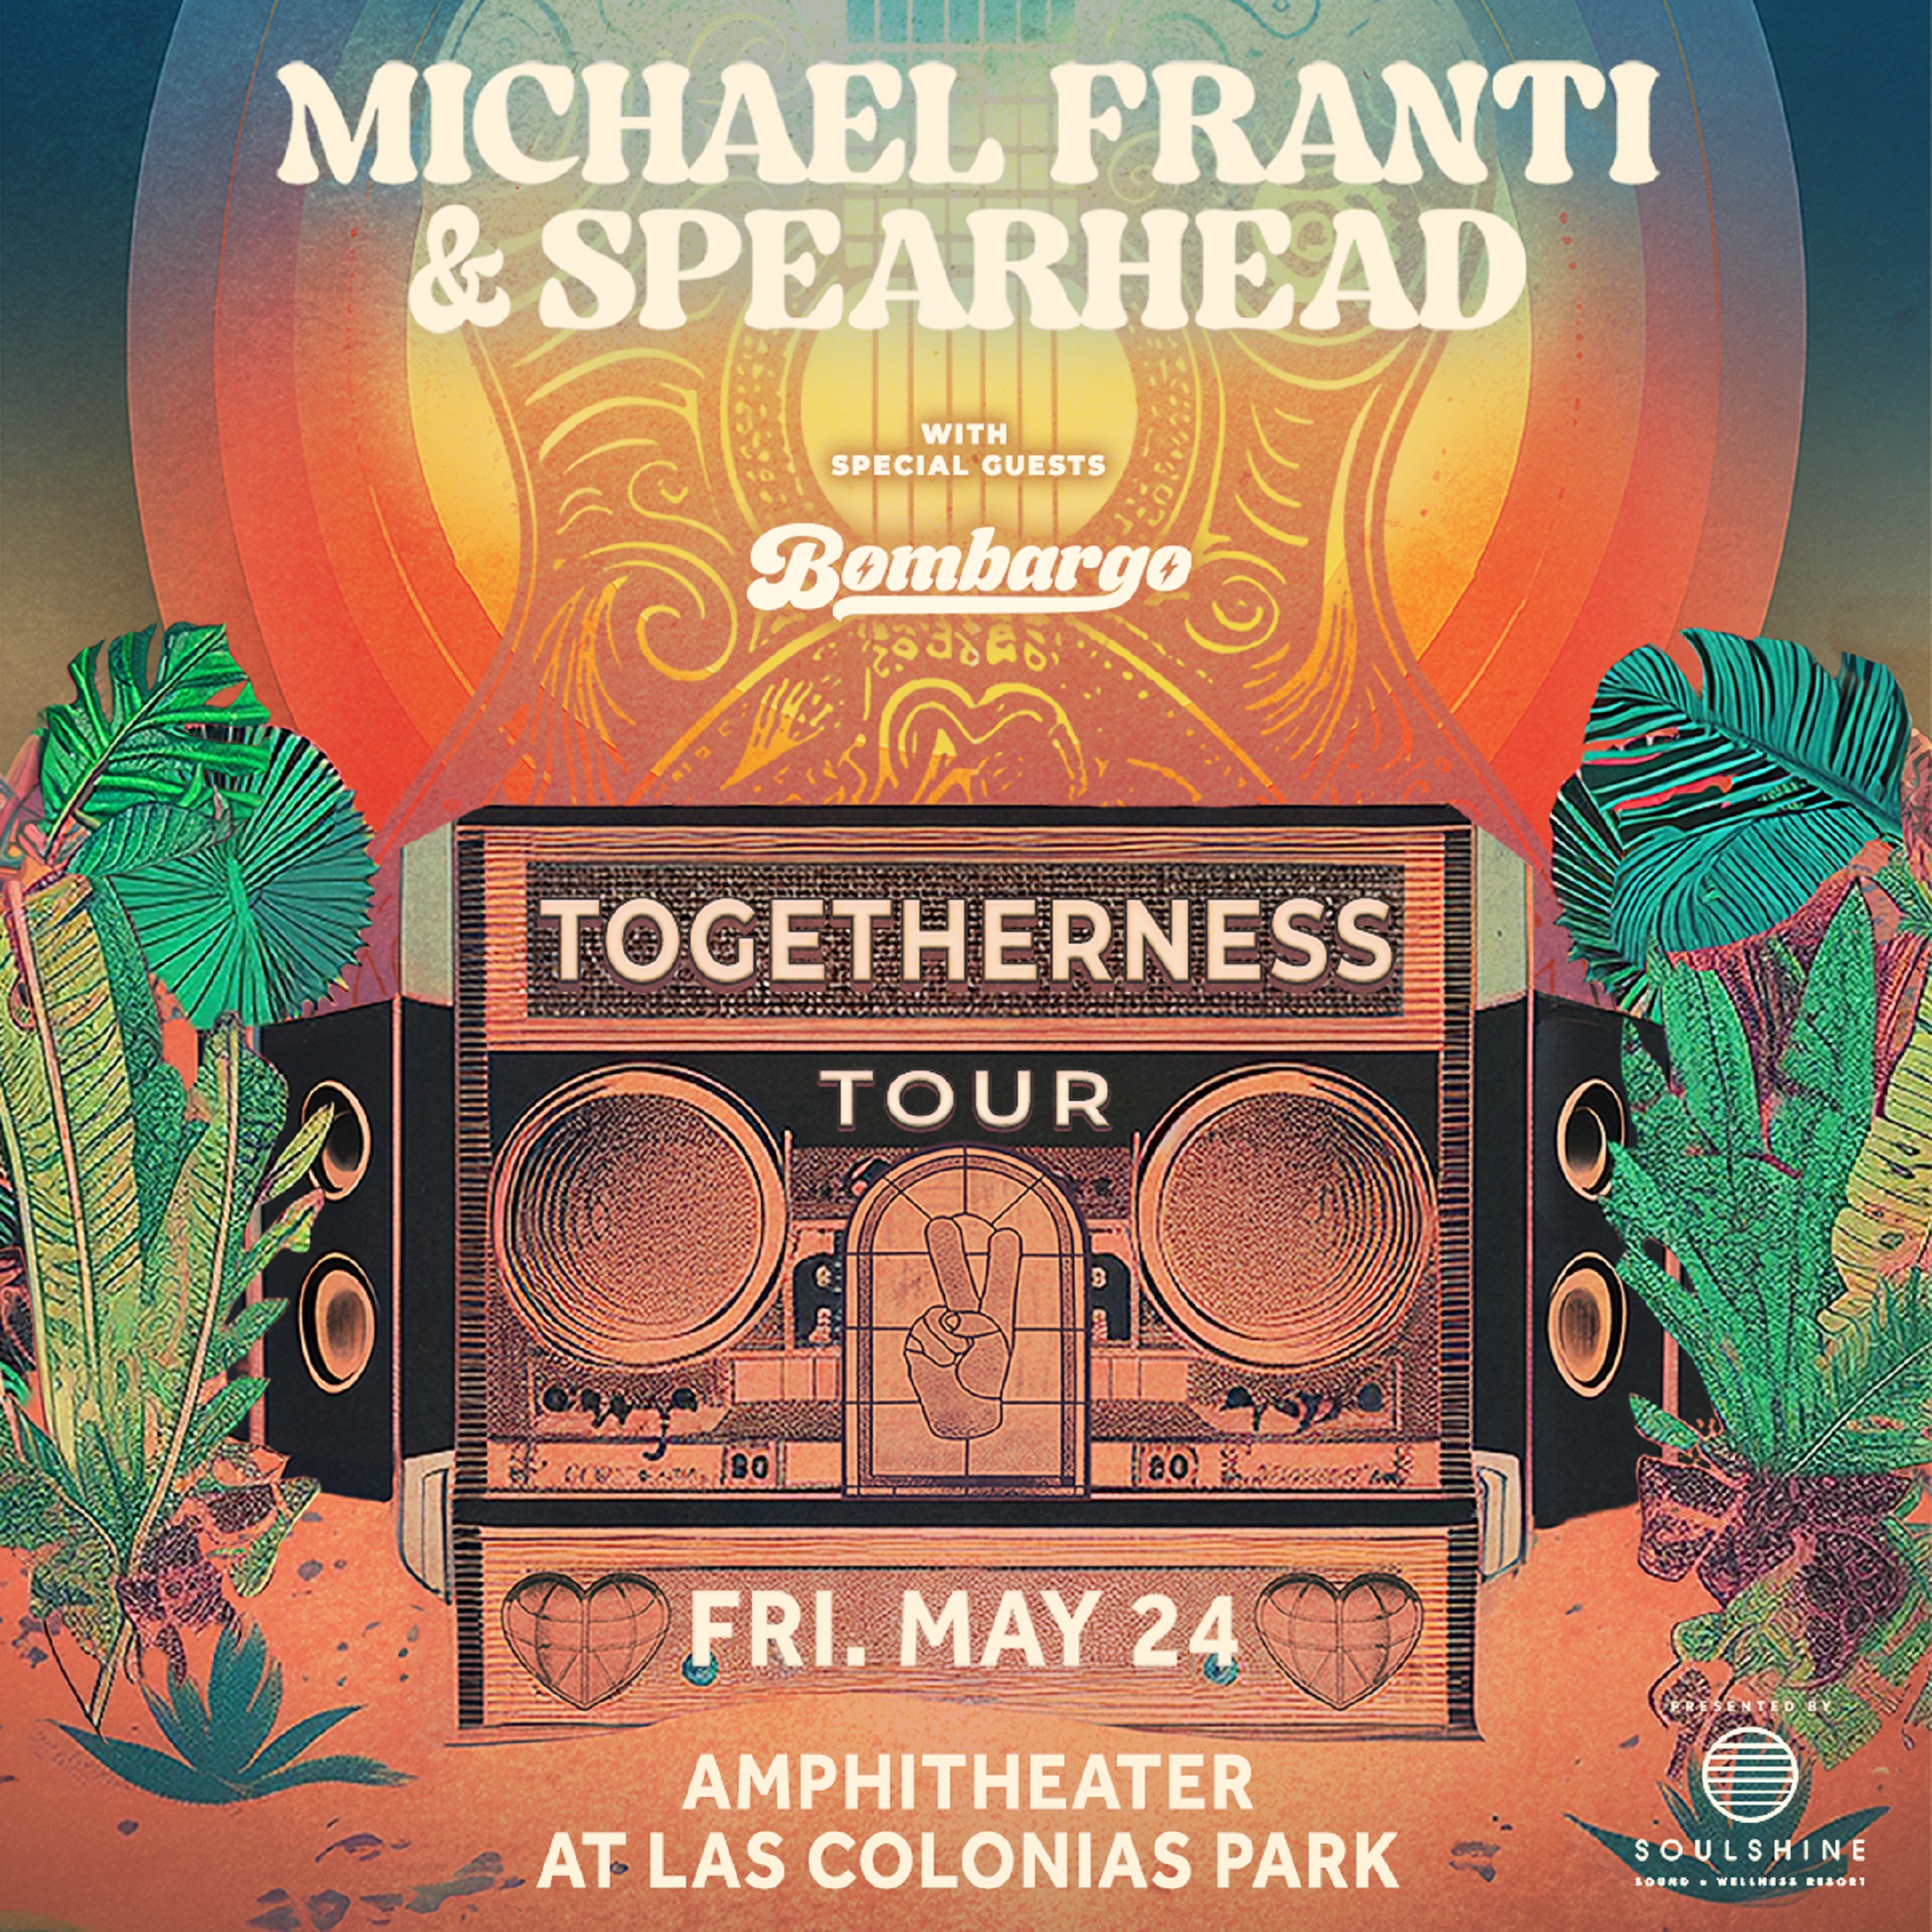 MICHAEL FRANTI & SPEARHEAD ANNOUNCE TOGETHERNESS TOUR